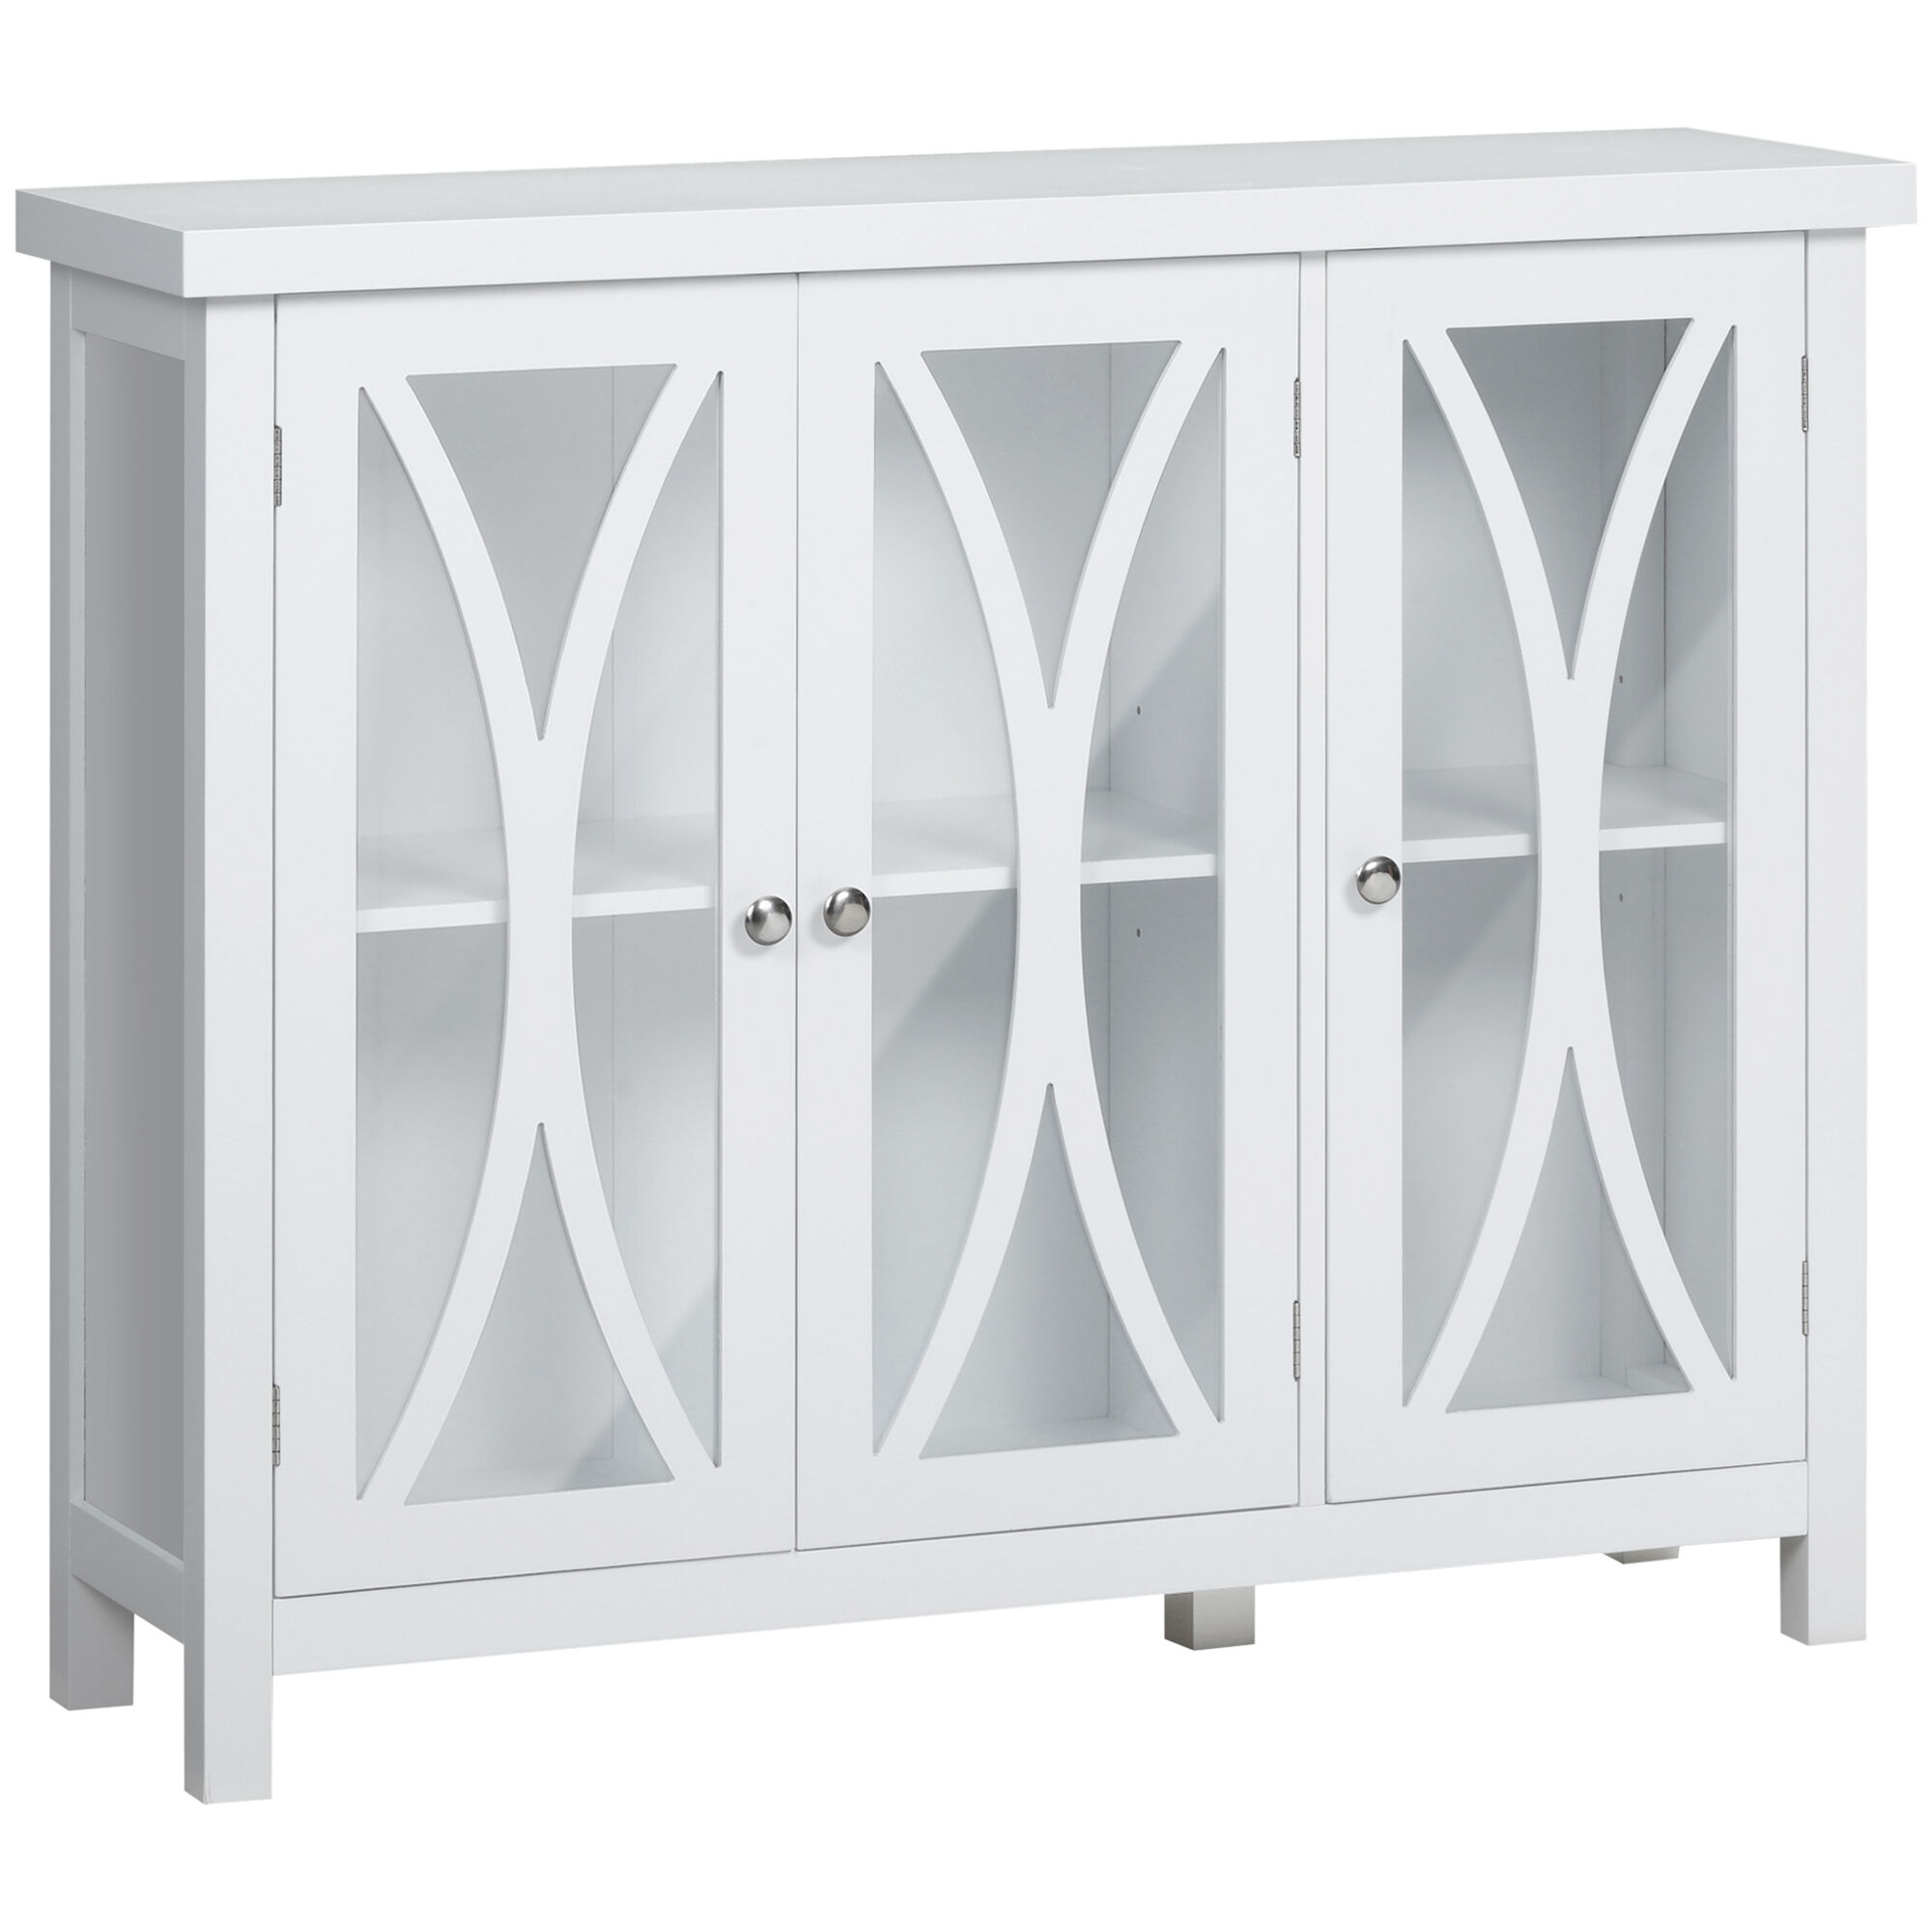 HOMCOM Buffet Sideboard Modern White Kitchen Cabinet with Glass Doors Storage for Dining Room Bedroom   Aosom.com